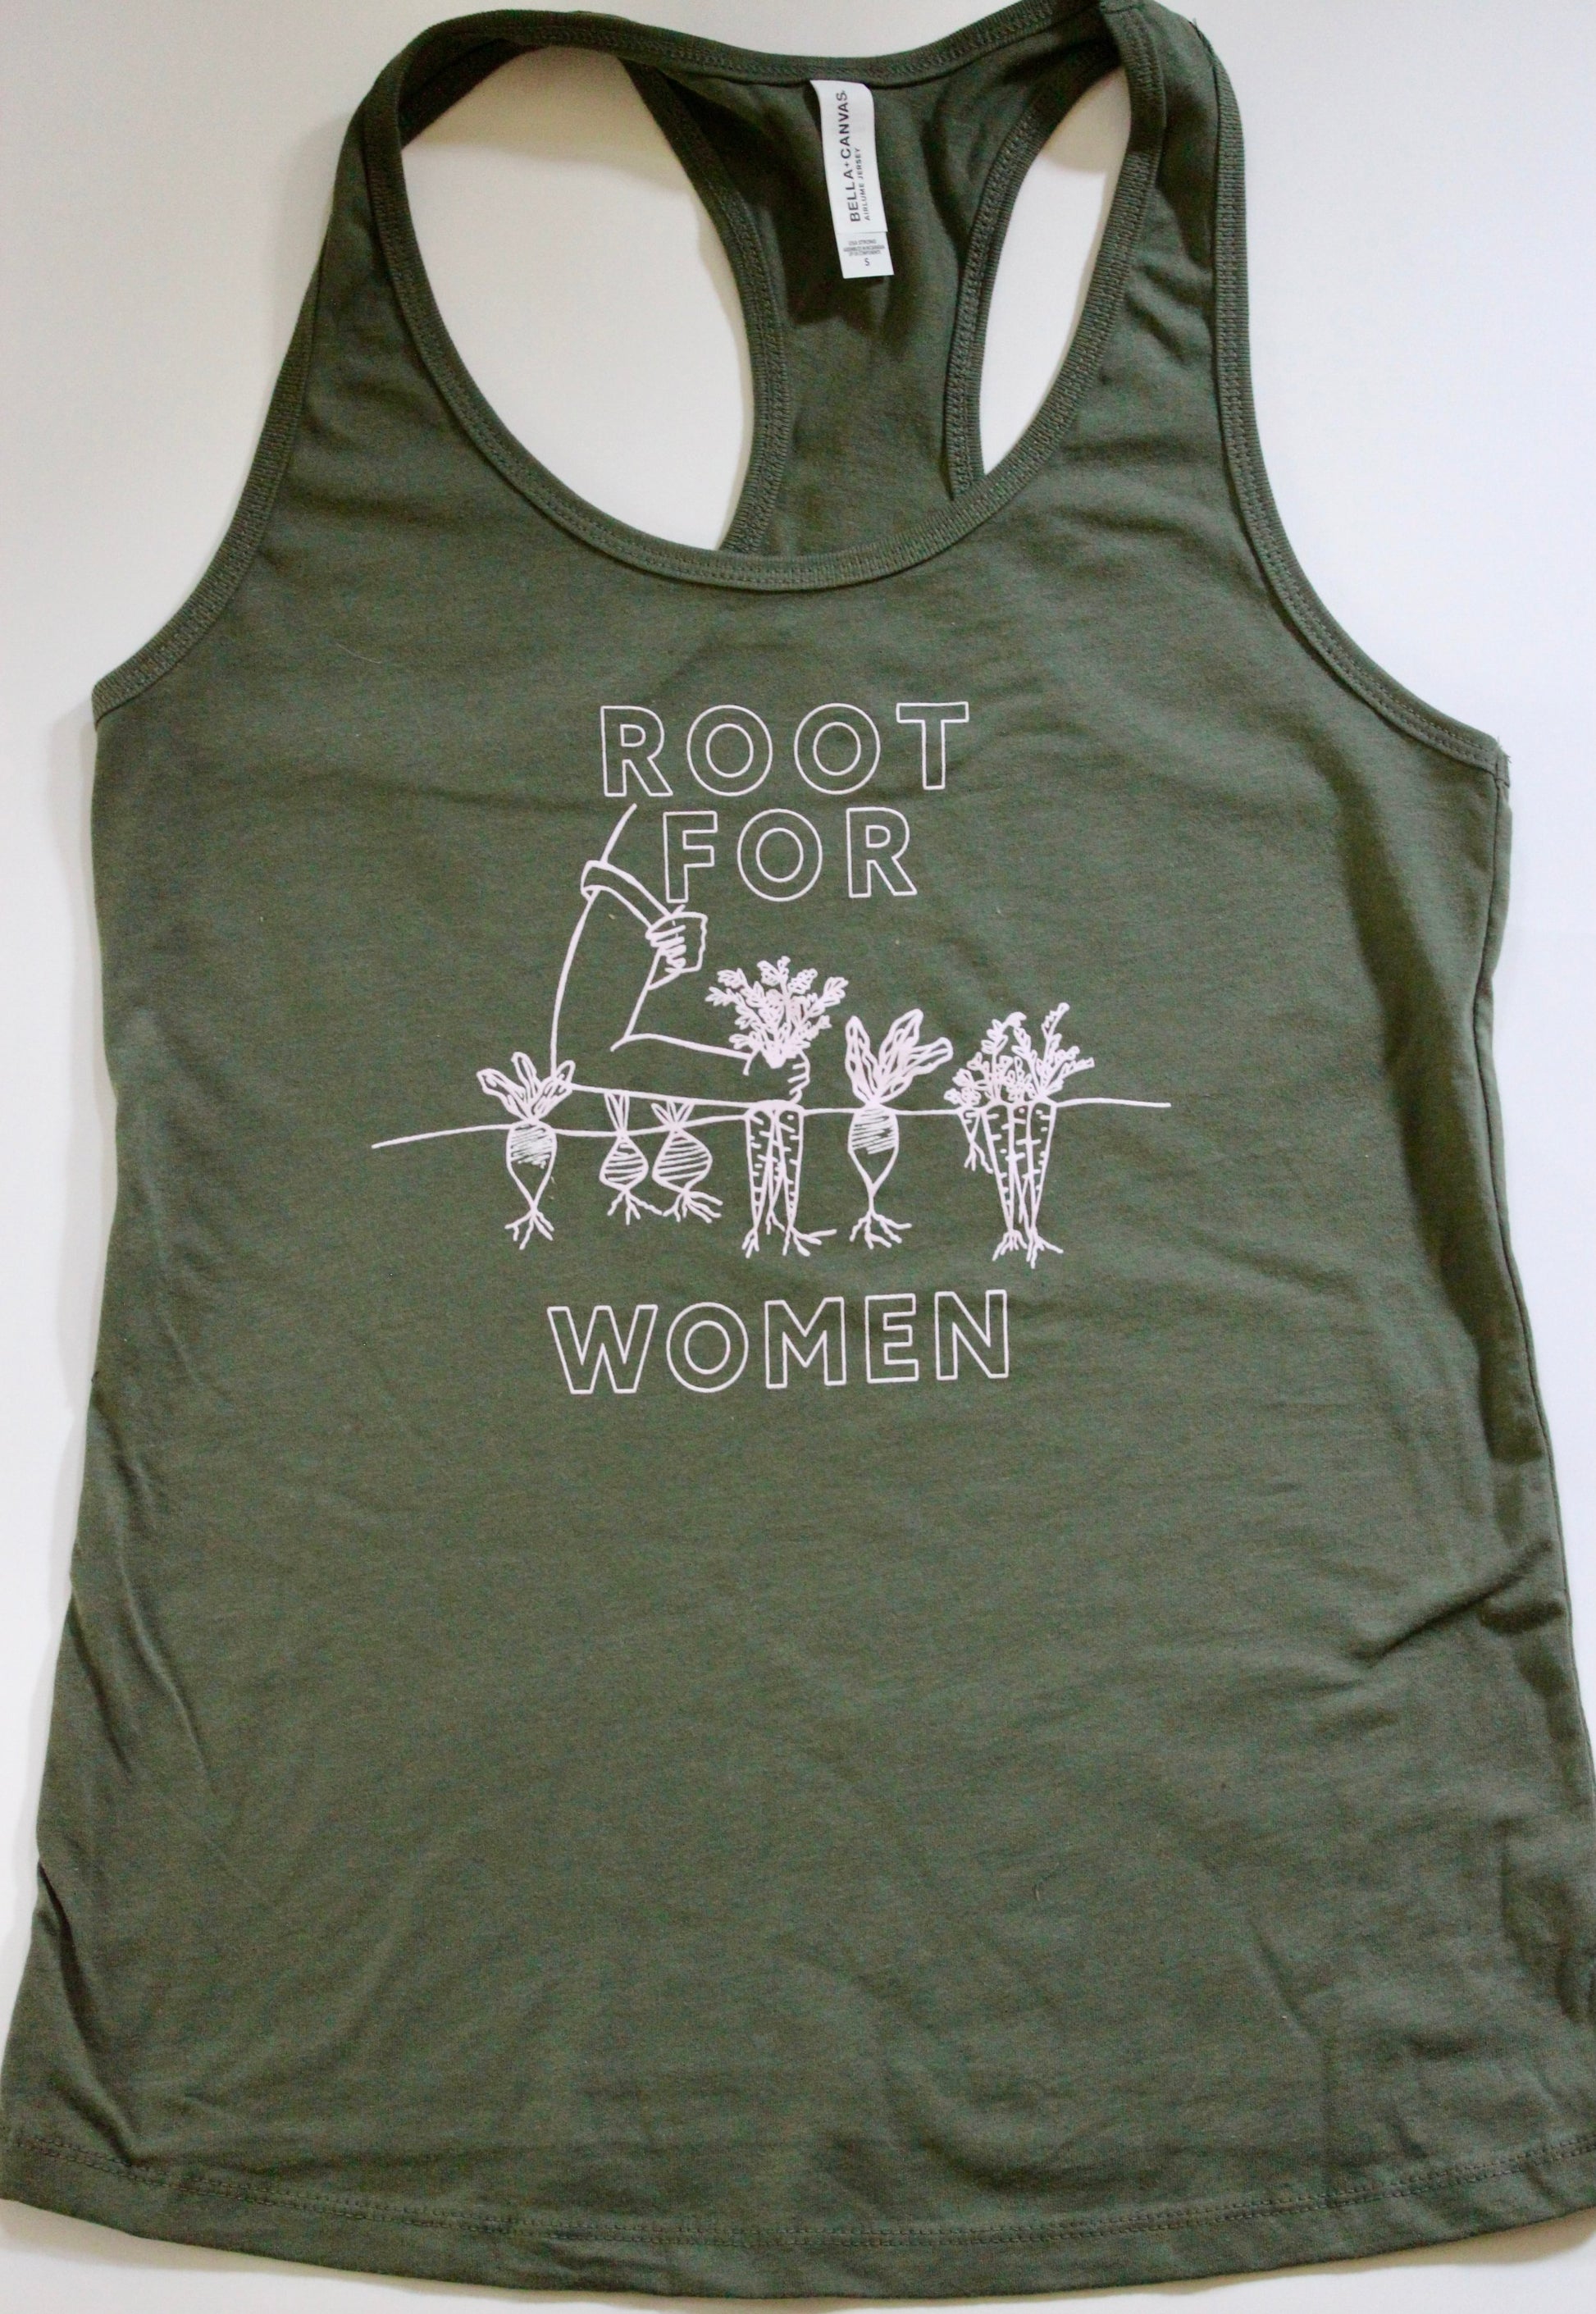 An olive green tank top with white block letters that read "Root for Women"